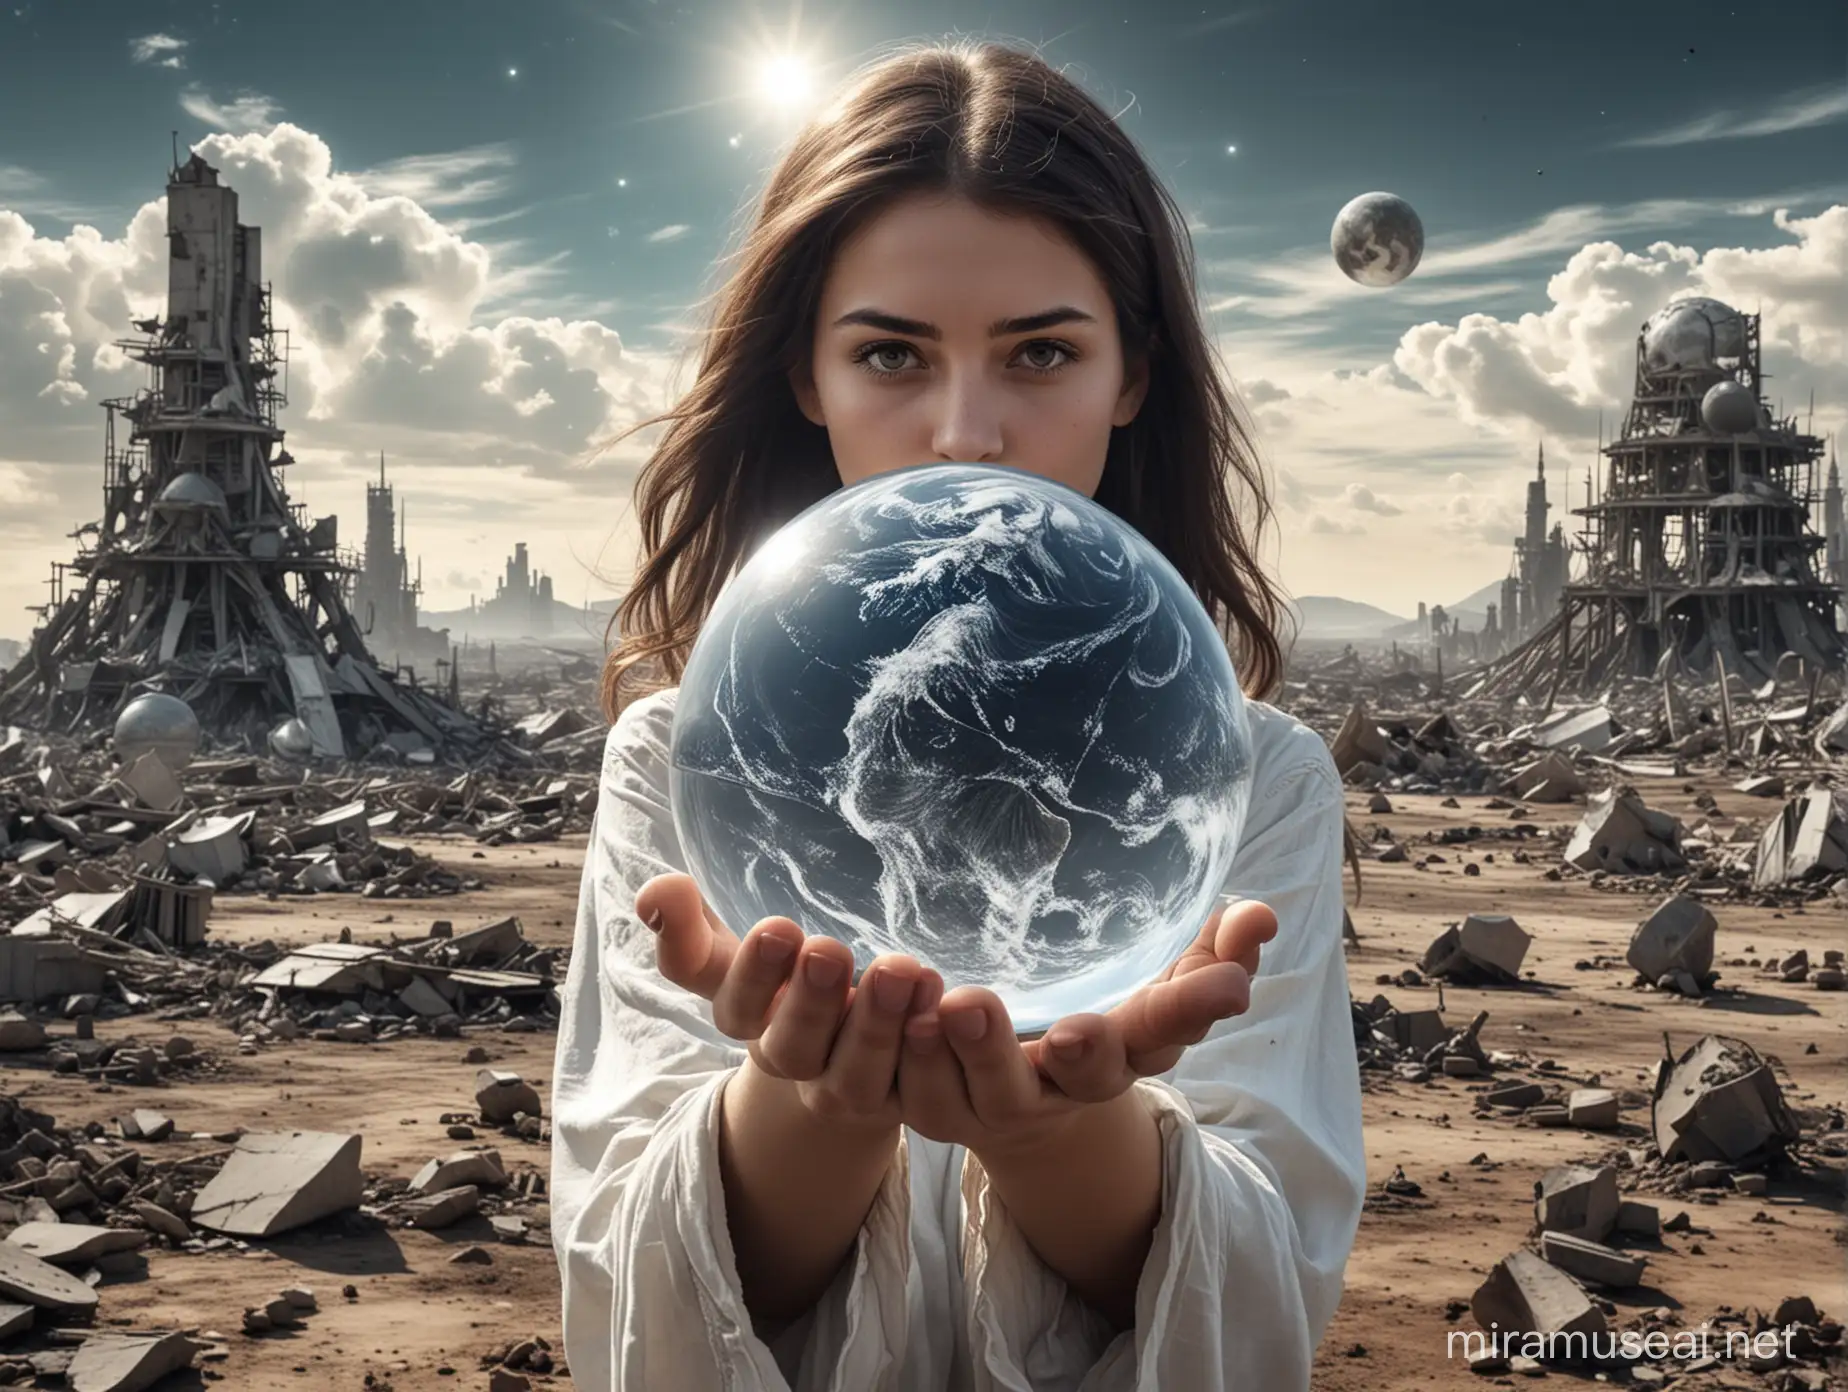 Draw a clairvoyant girl full size as foreground, in her hands she is holding the earth, instead of a crystal ball. Half of the earth is destroyed by atomic bombs,
Background is a surrealistic space landscape on a foreign planet